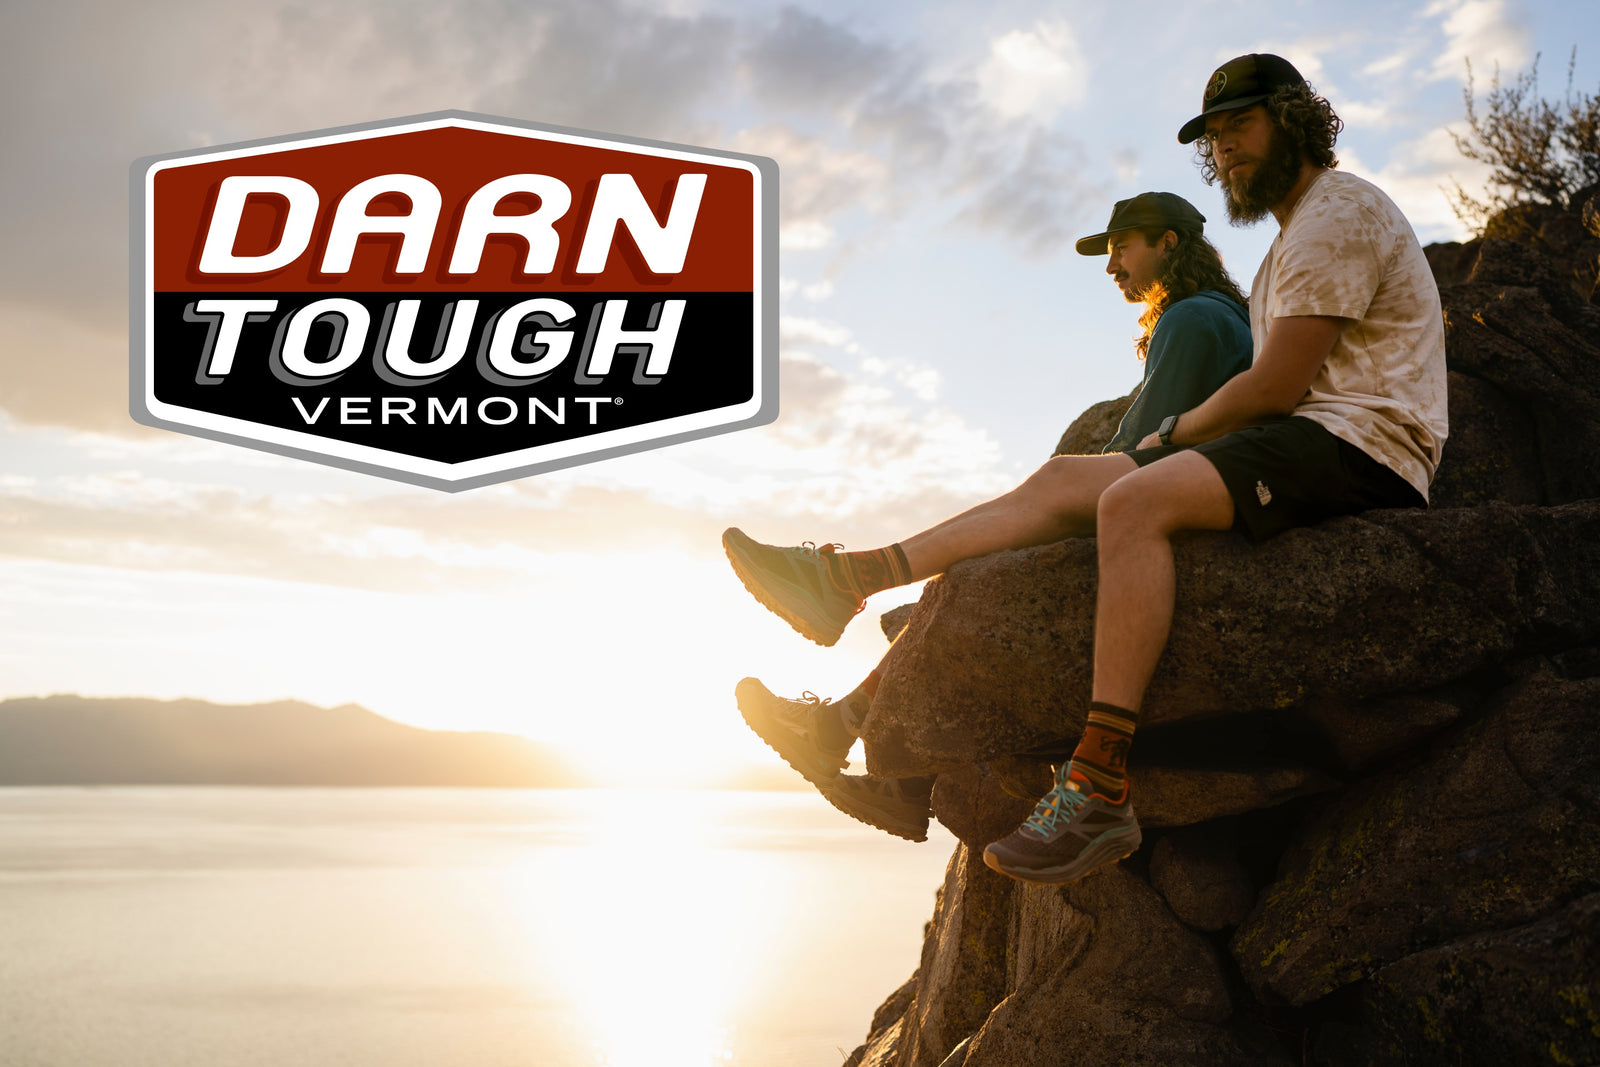 Two hikers seated on rock with Darn Tough logo overlaid